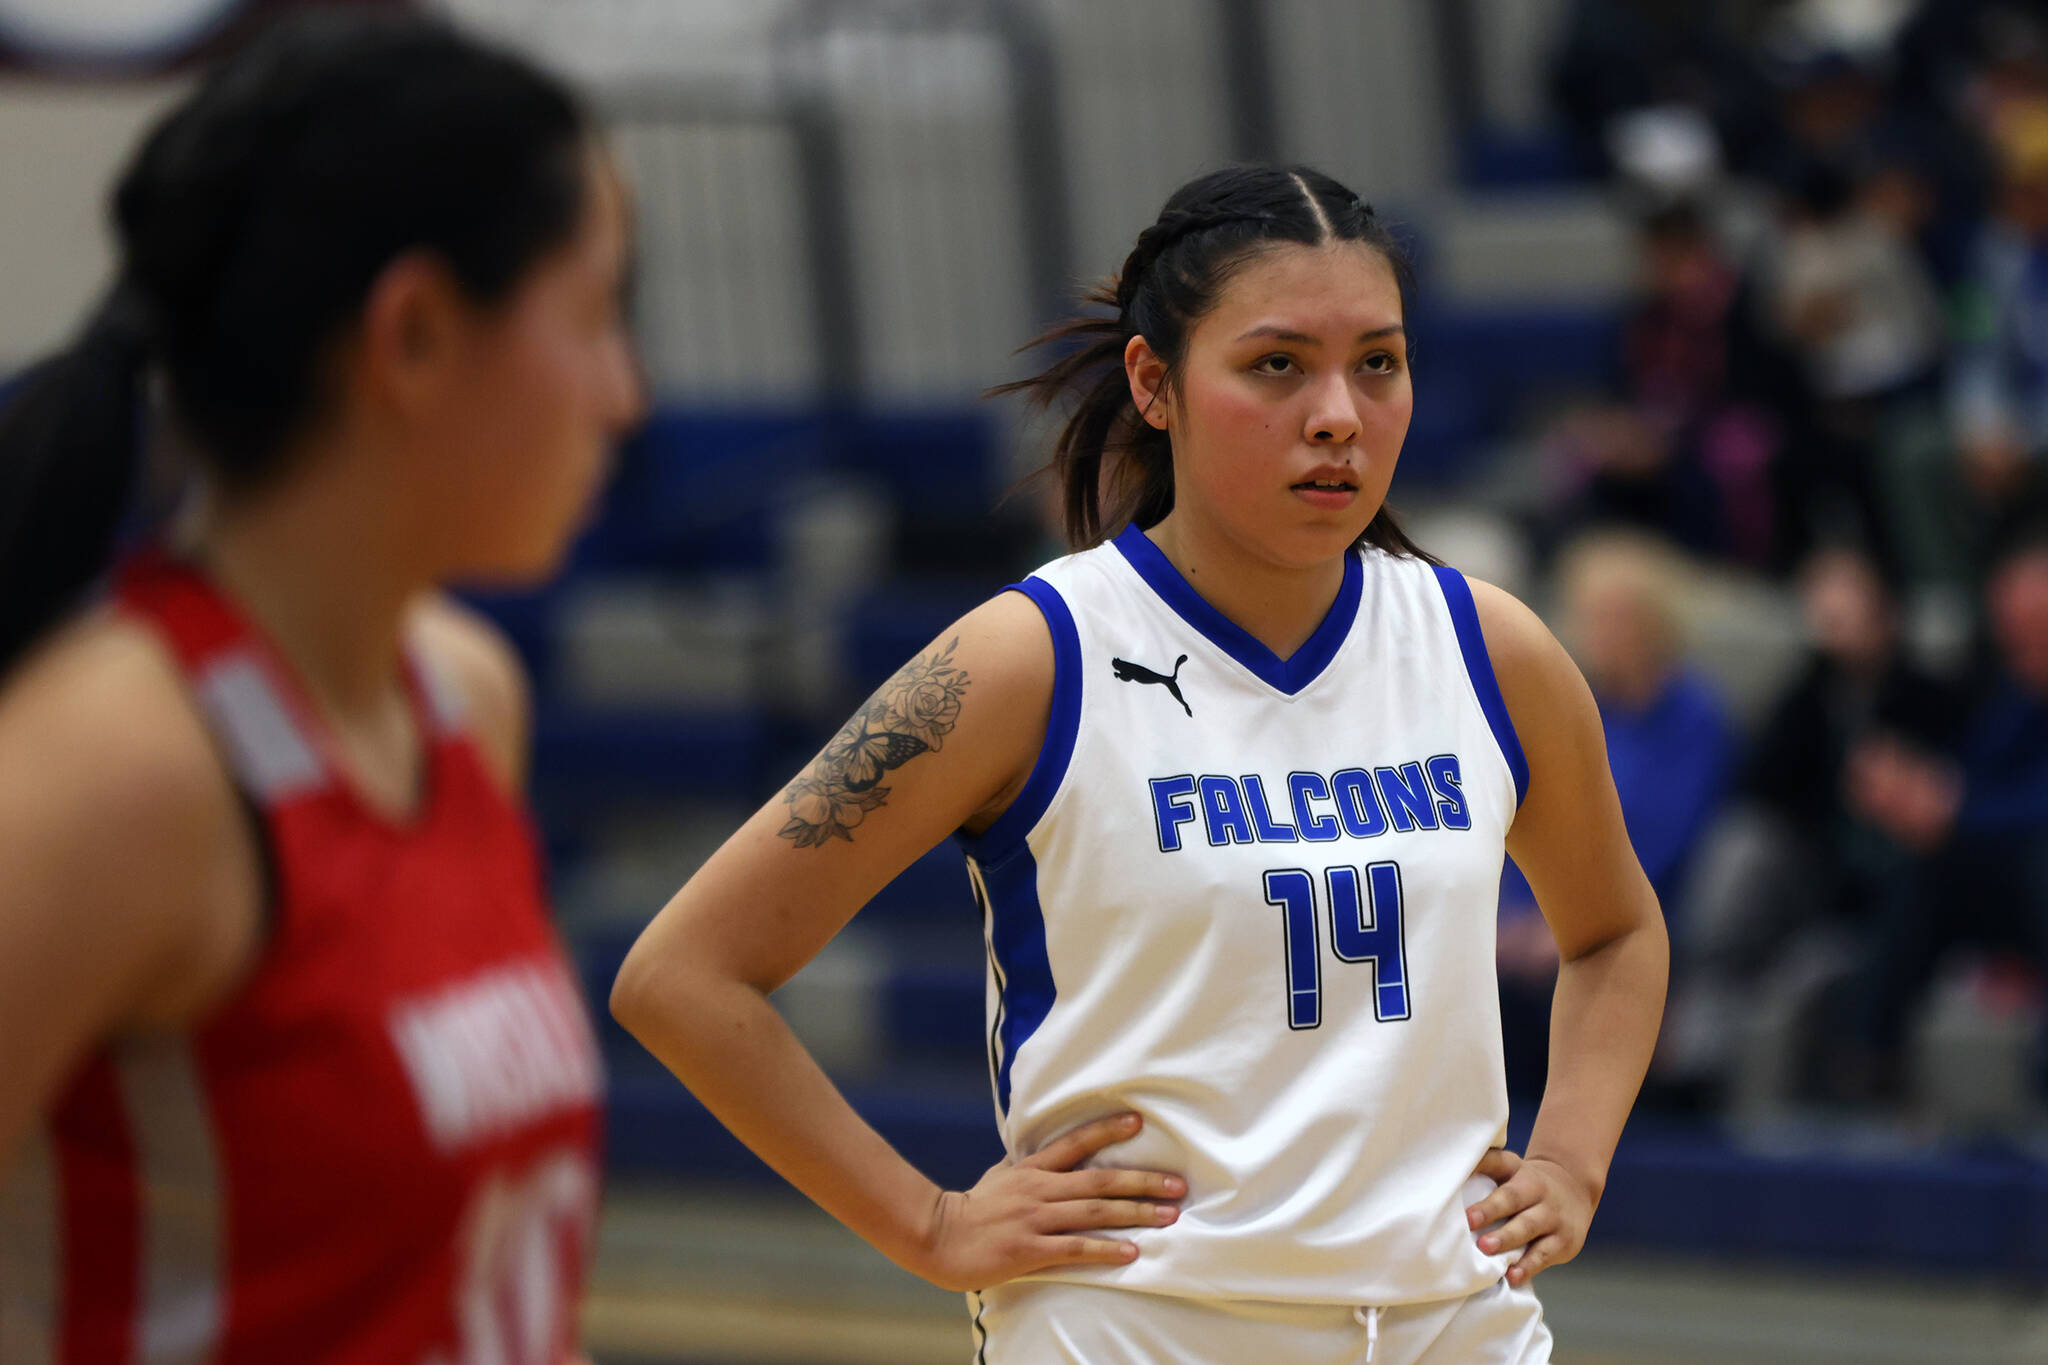 TMHS senior Kiara Endicott gets ready to sink two free throws late in a home game against Wasilla. Kookesh would finish as her team’s co-leading scorer on the back of 5 fourth-quarter points. (Ben Hohenstatt / Juneau Empire)